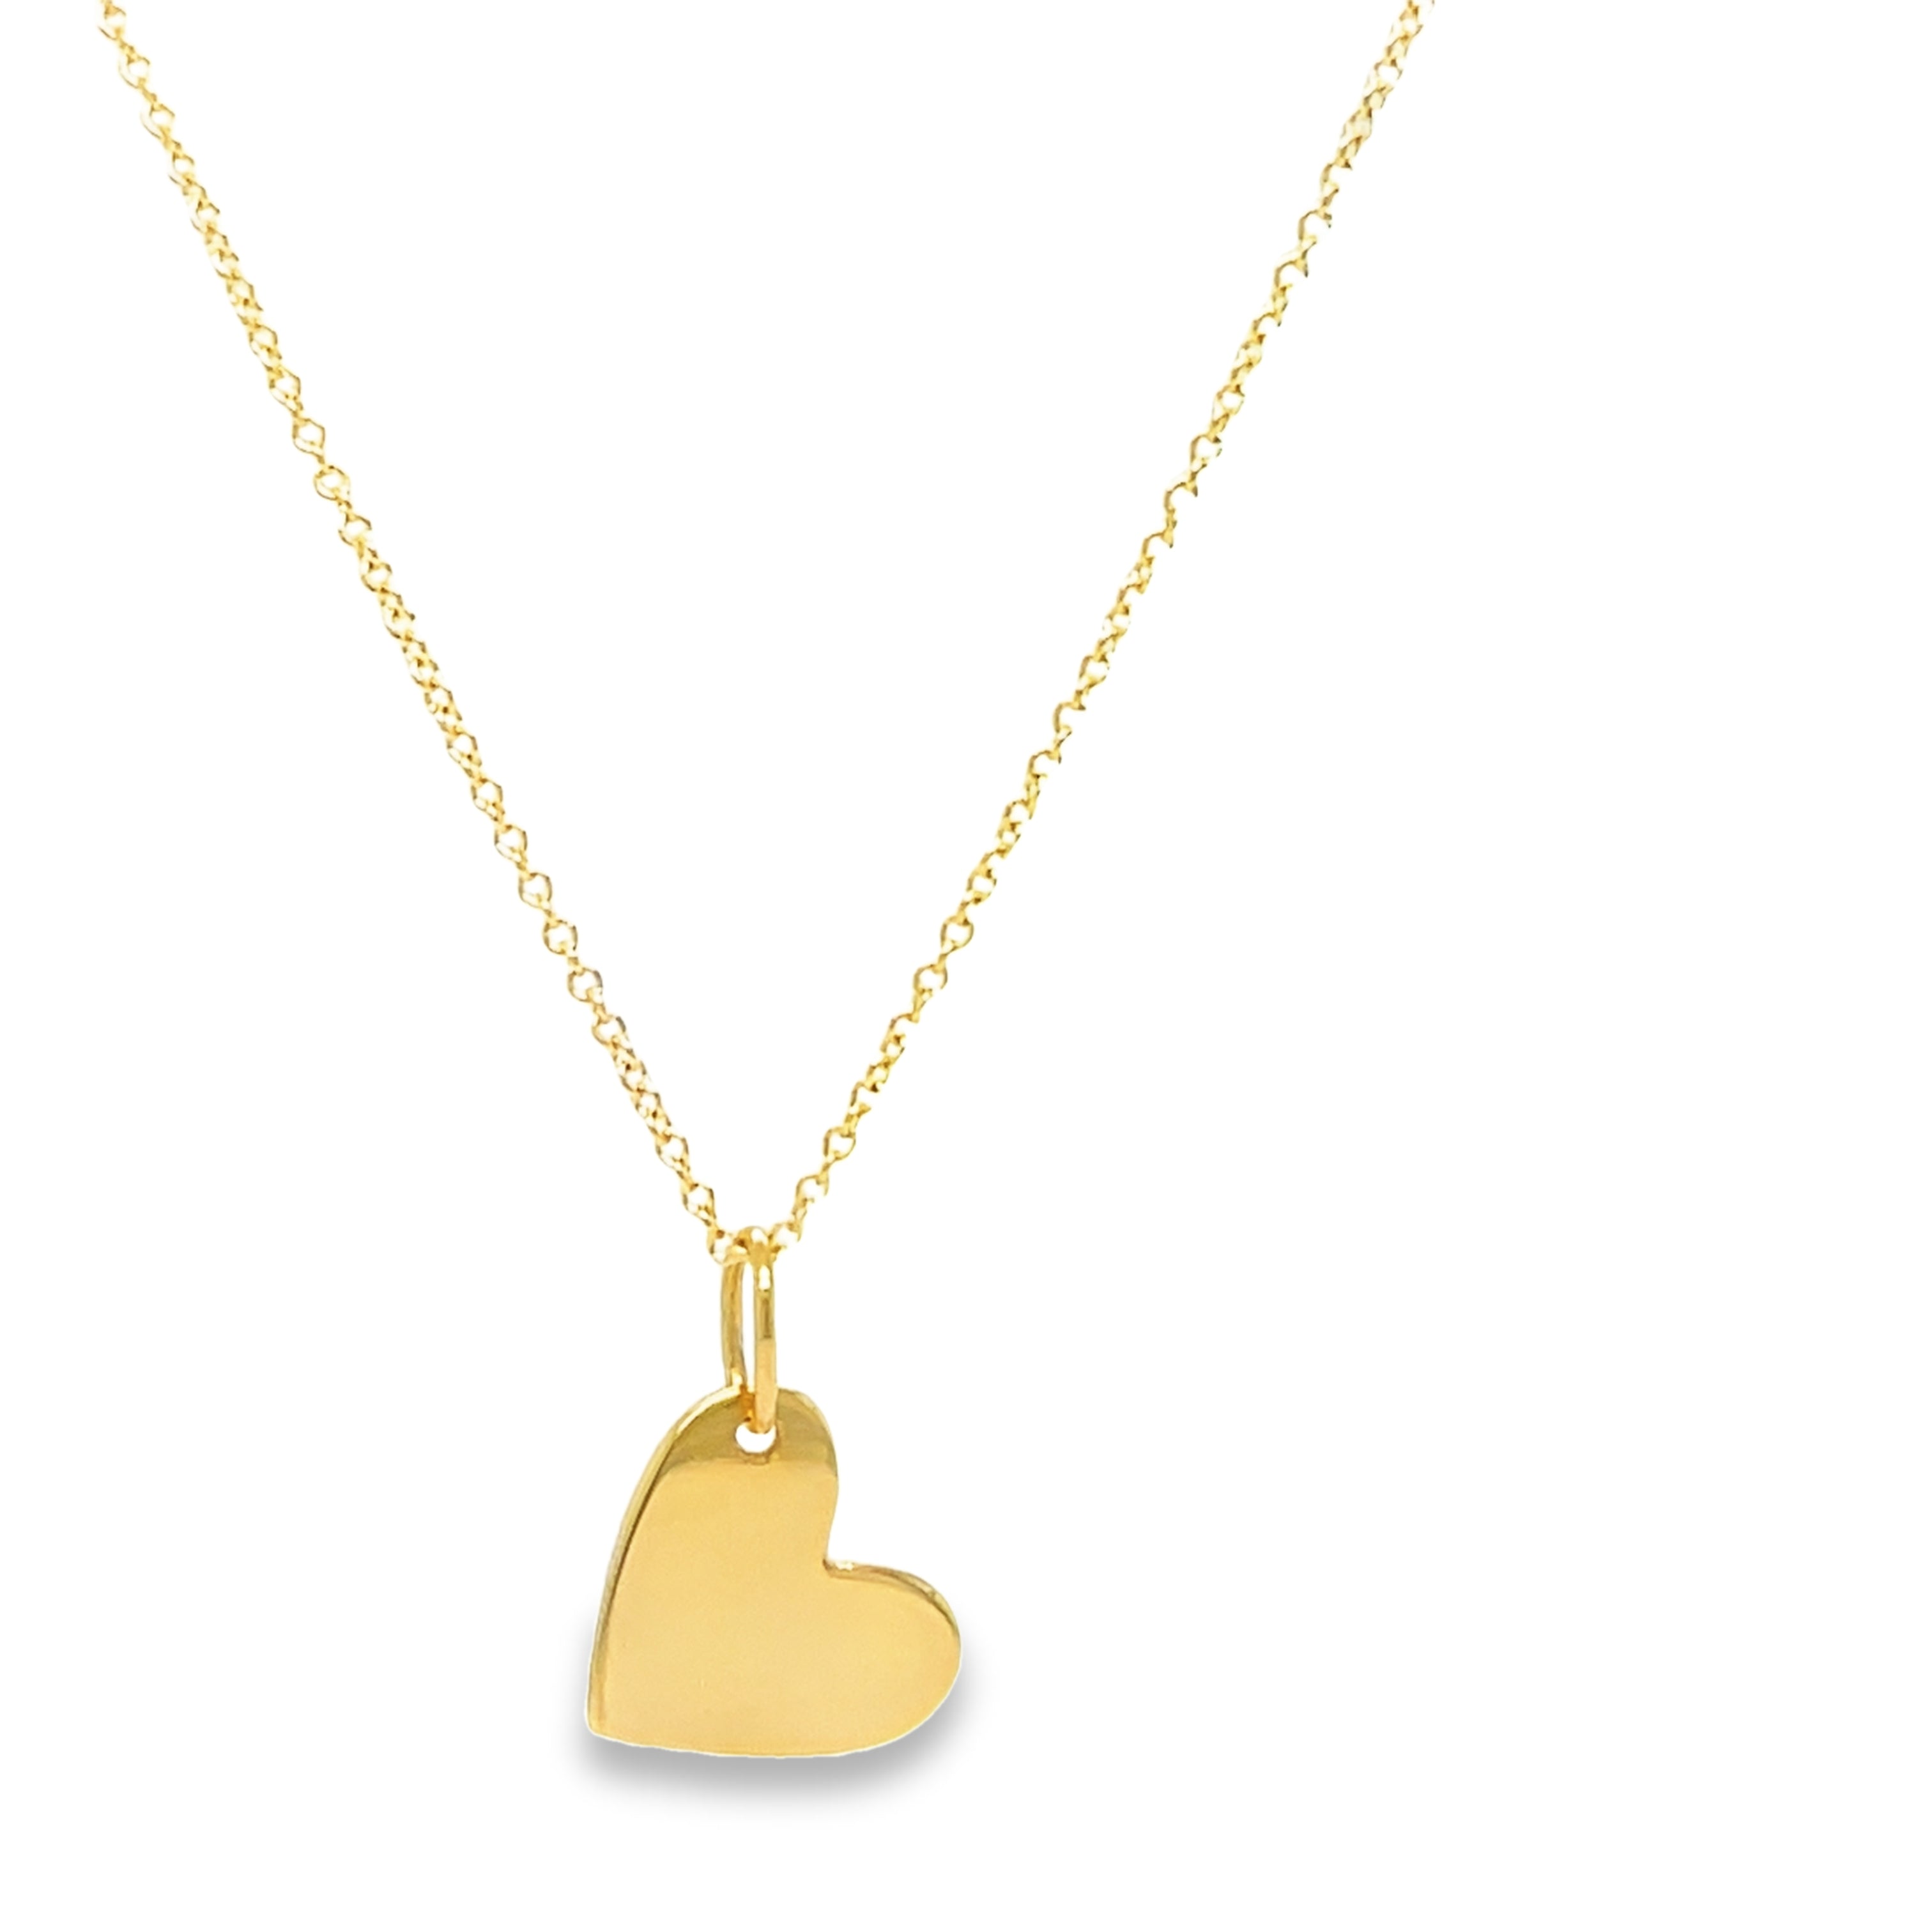 "Fall in love with this stunning 14k Yellow Gold Tilted Heart Necklace. The 18" chain delicately holds a 12.00 mm heart pendant, all crafted from high-quality 14k yellow gold. Add a touch of elegance and romance to any outfit with this beautiful necklace."